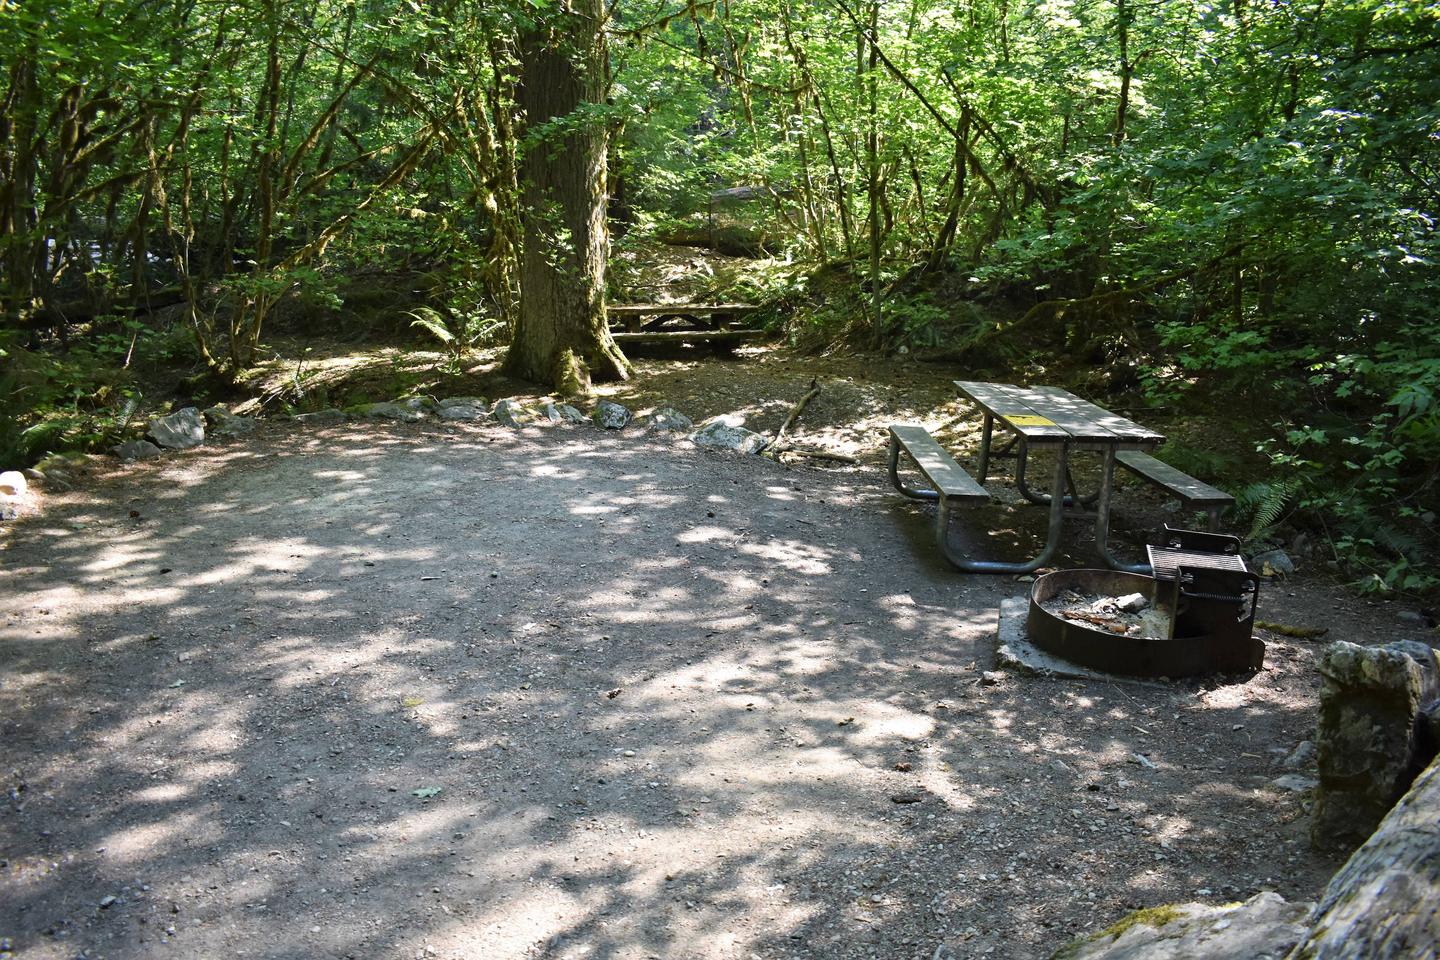 Tent area, picnic table, and fire ringView of campsite